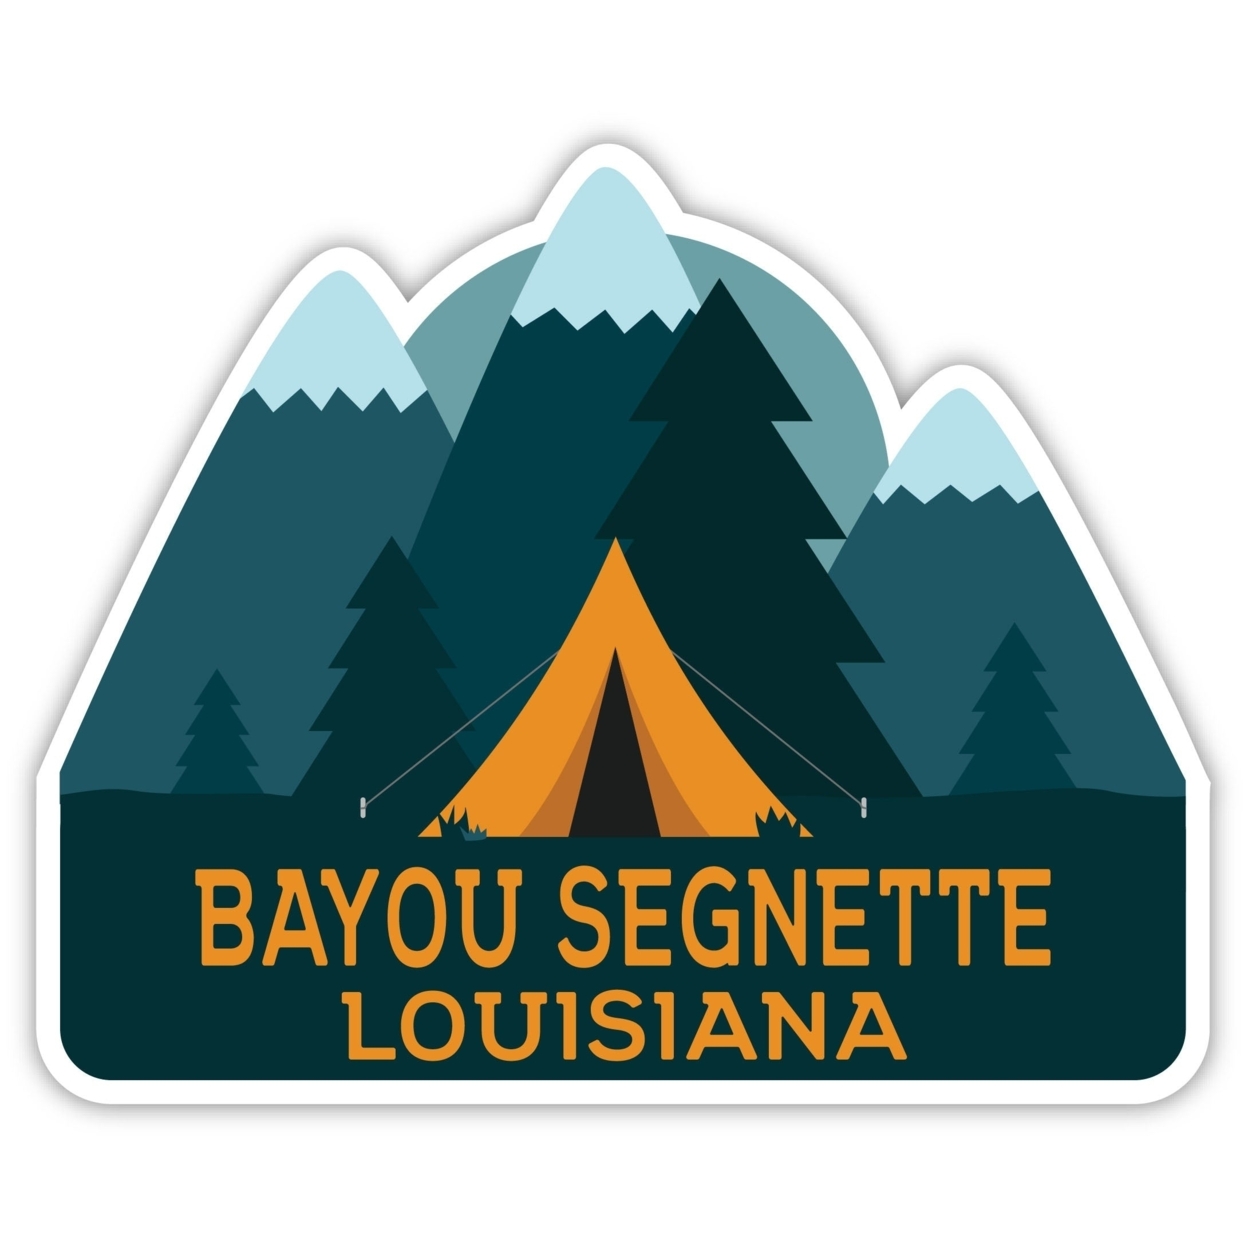 Bayou Segnette Louisiana Souvenir Decorative Stickers (Choose Theme And Size) - 4-Pack, 6-Inch, Tent